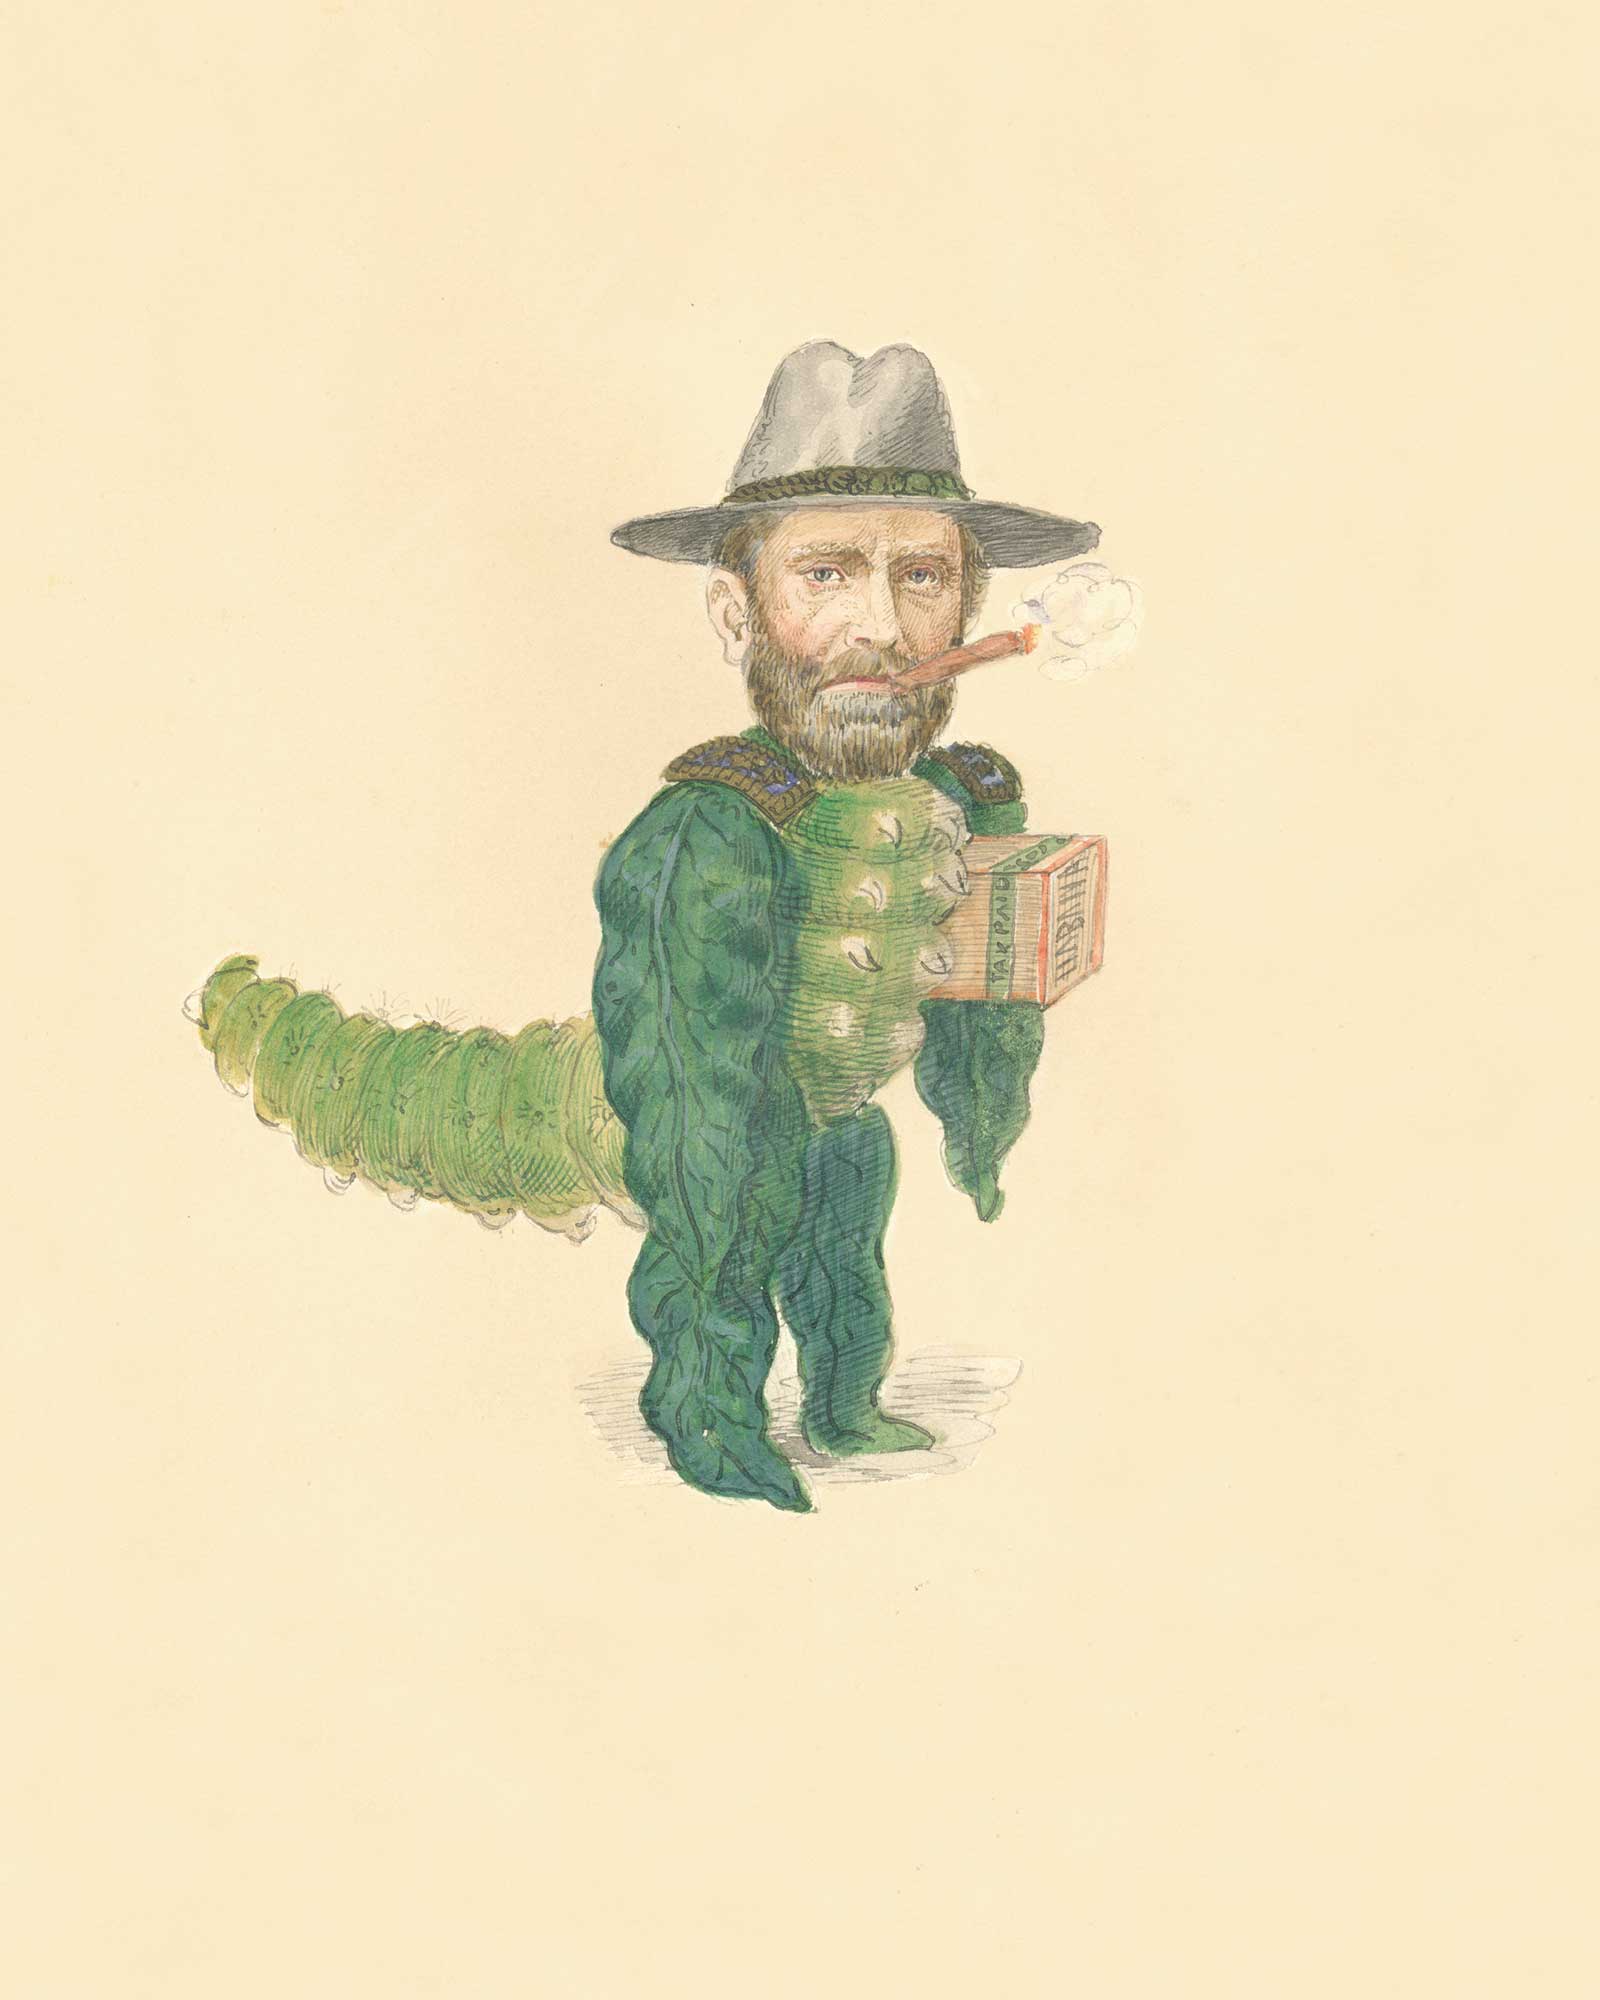 Charles Briton’s illustration of President Ulysses S. Grant depicted as a tobacco grub, the much-despised pest. His costume designs were created for the Mistick Krewe of Comus for the eighteen seventy-three Mardi Gras parade in New Orleans. Organized in eighteen fifty-six, Comus was the first of the krewes, or secret societies, that marched in the annual parades held in the city during the days leading up to the beginning of Lenten abstinence. Briton’s costumes were created to illustrate the theme of the organization’s procession that year: “The Missing Links to Darwin’s Origin of Species.” Featuring fantastical representations of a wide range of fauna and flora, Briton’s designs for the conservative and predominantly Anglo-American Comus krewe were intended to mock both the new theories of evolution and the Reconstruction-era politicians of the day.